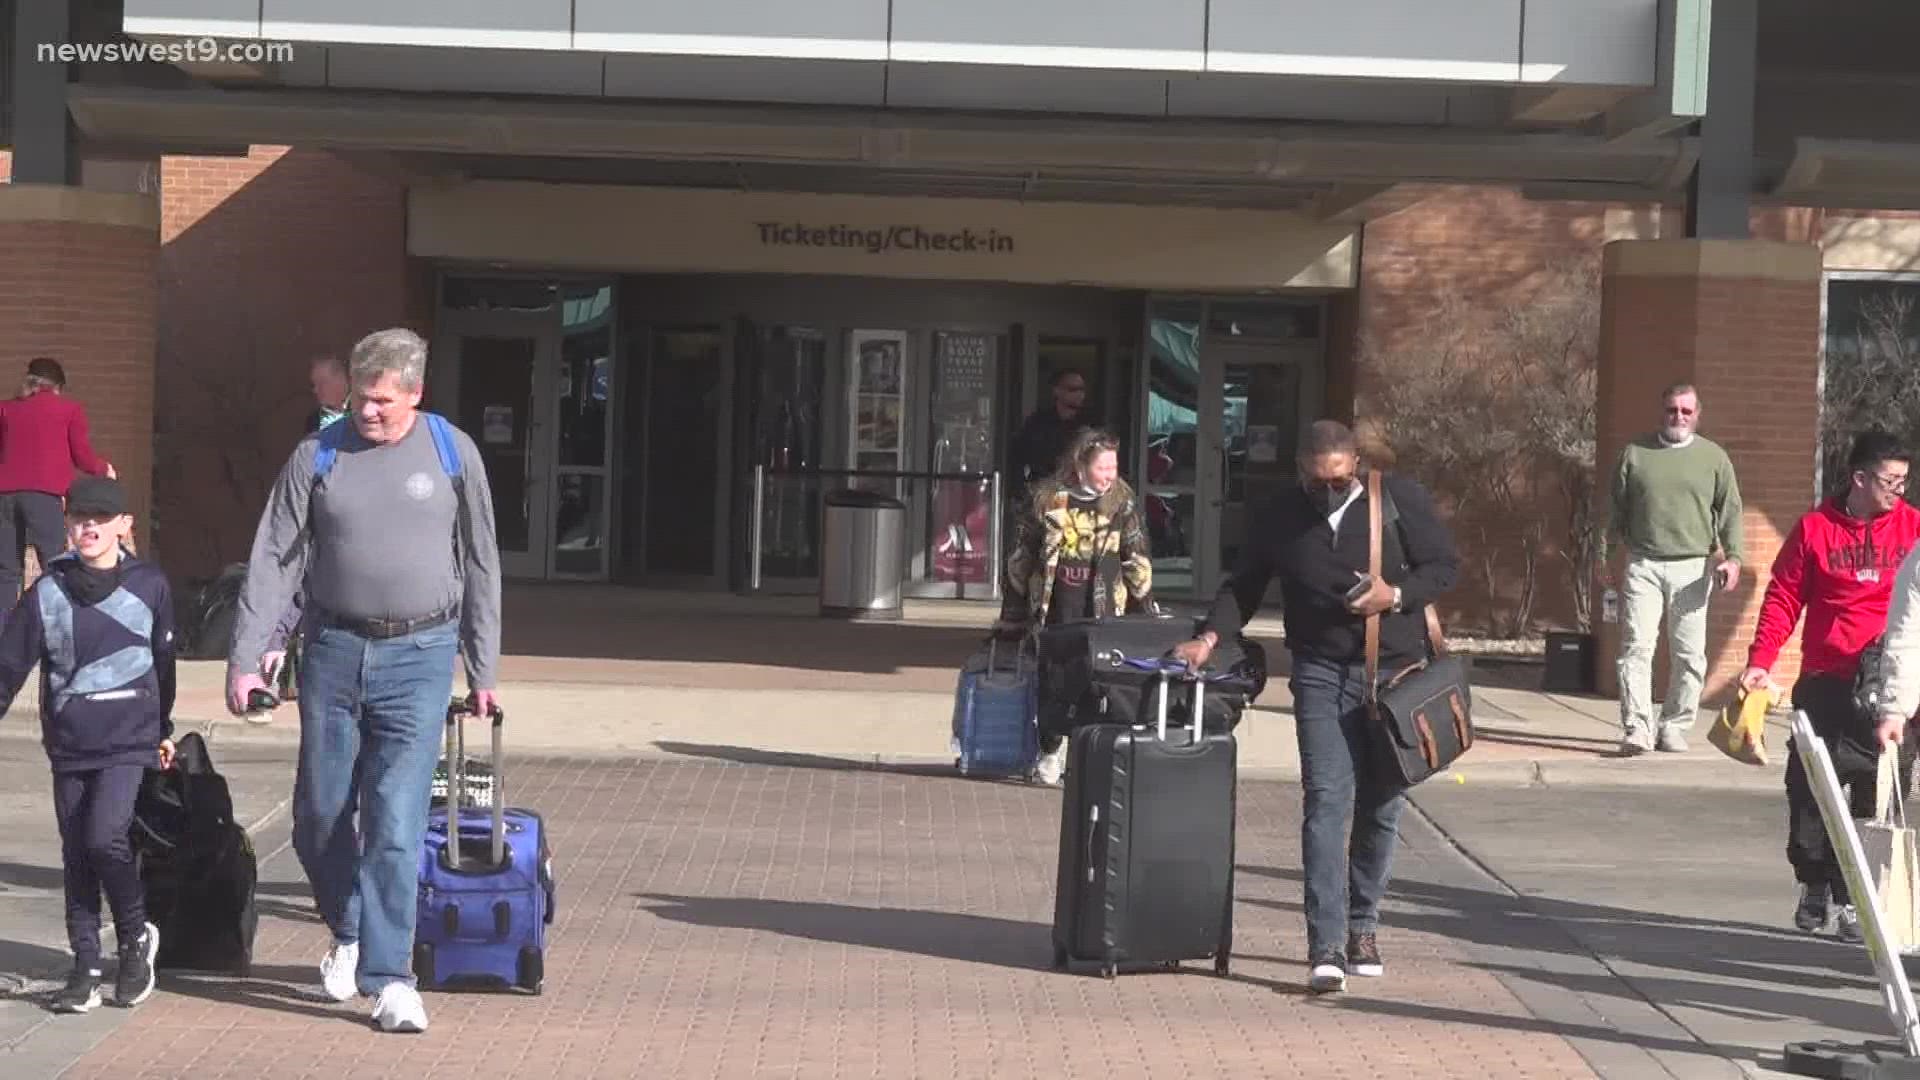 NewsWest 9's Rachel Robinson spoke with a TSA official to get a better understanding about what to look for in an airport and how to pack properly.